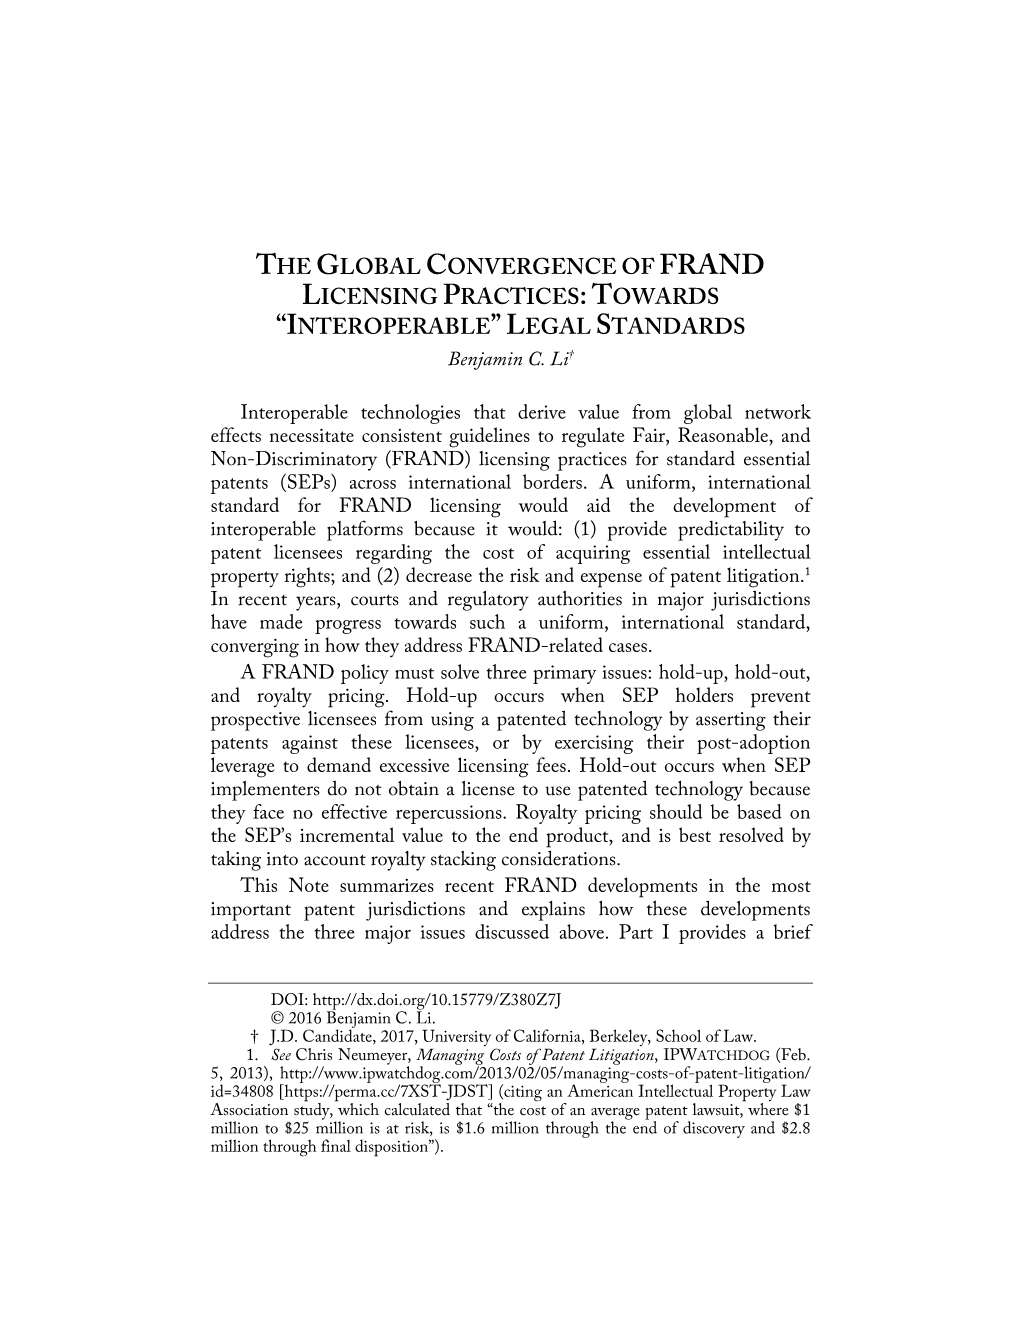 The Global Convergence of Frand Licensing Practices:Towards